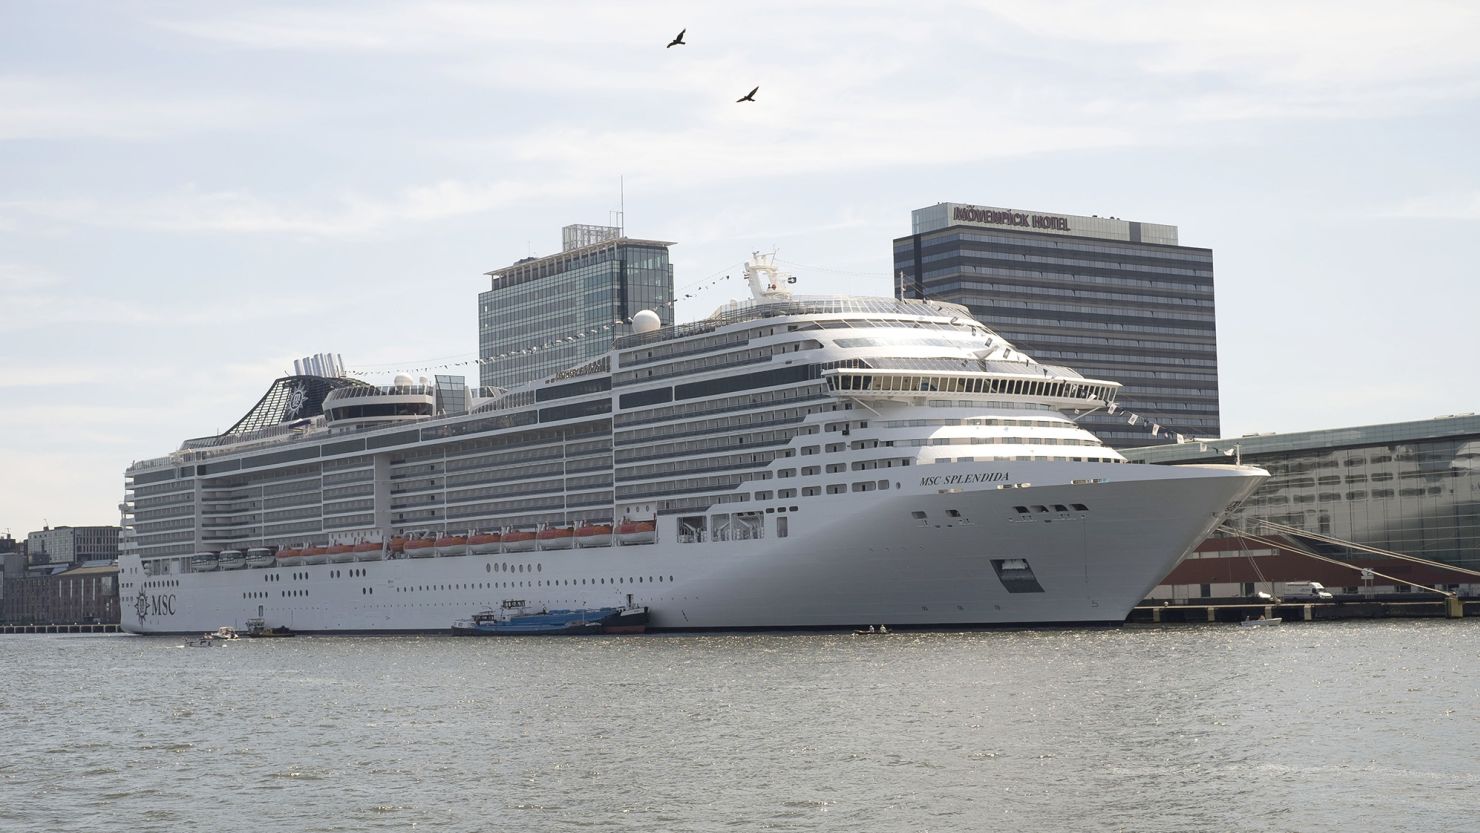 A general view of the 1,093-foot  MSC Splendida, the largest ever cruise ship to visit Amsterdam, docked in the city on July 1, 2015